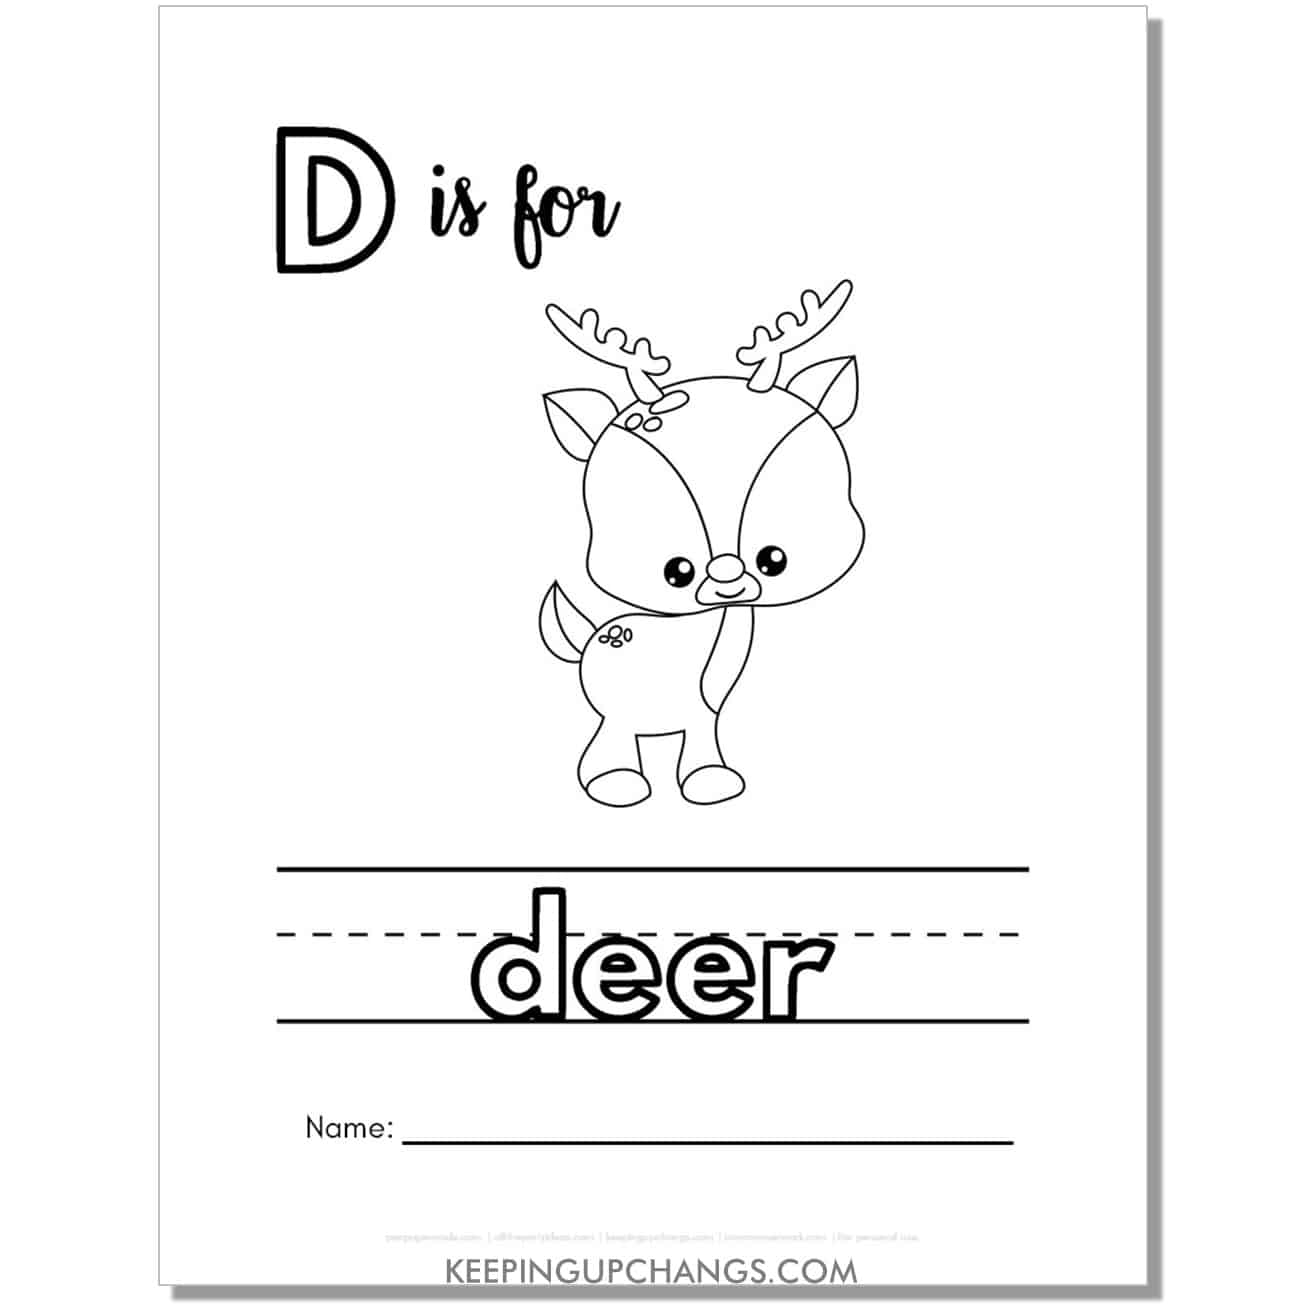 cute letter d coloring page worksheet with deer.